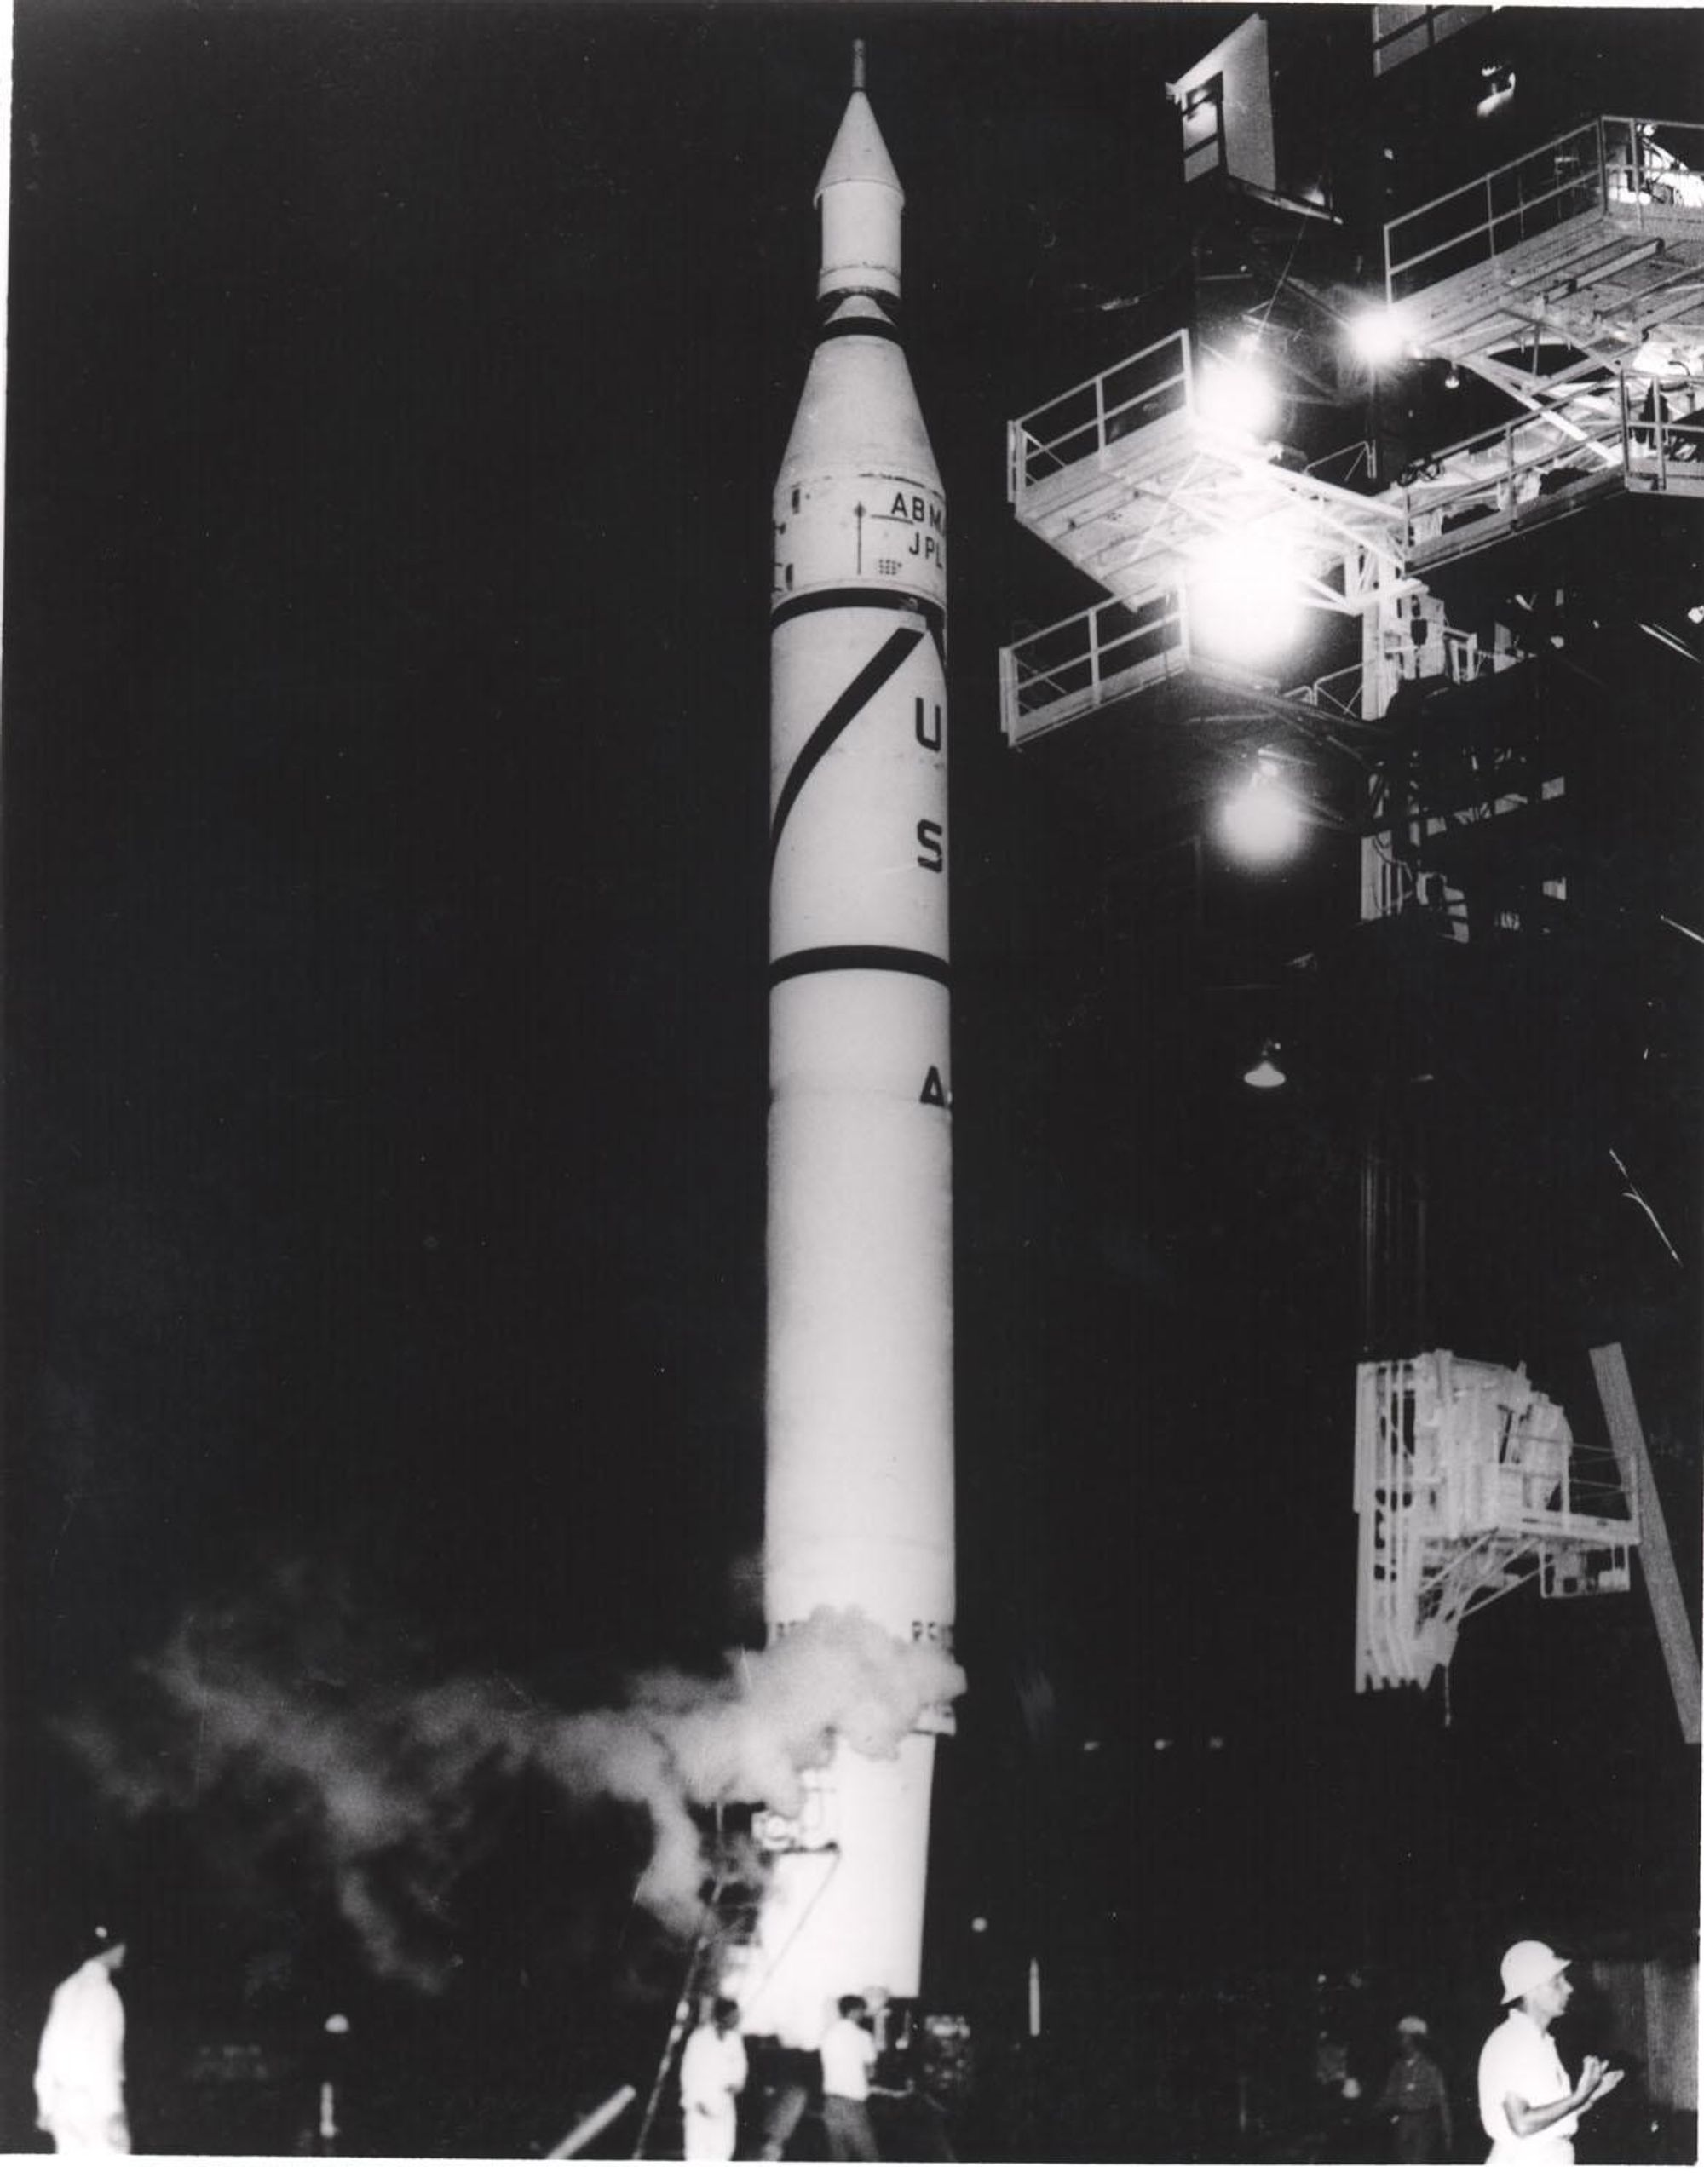 A tall, thin rocket about to be launched